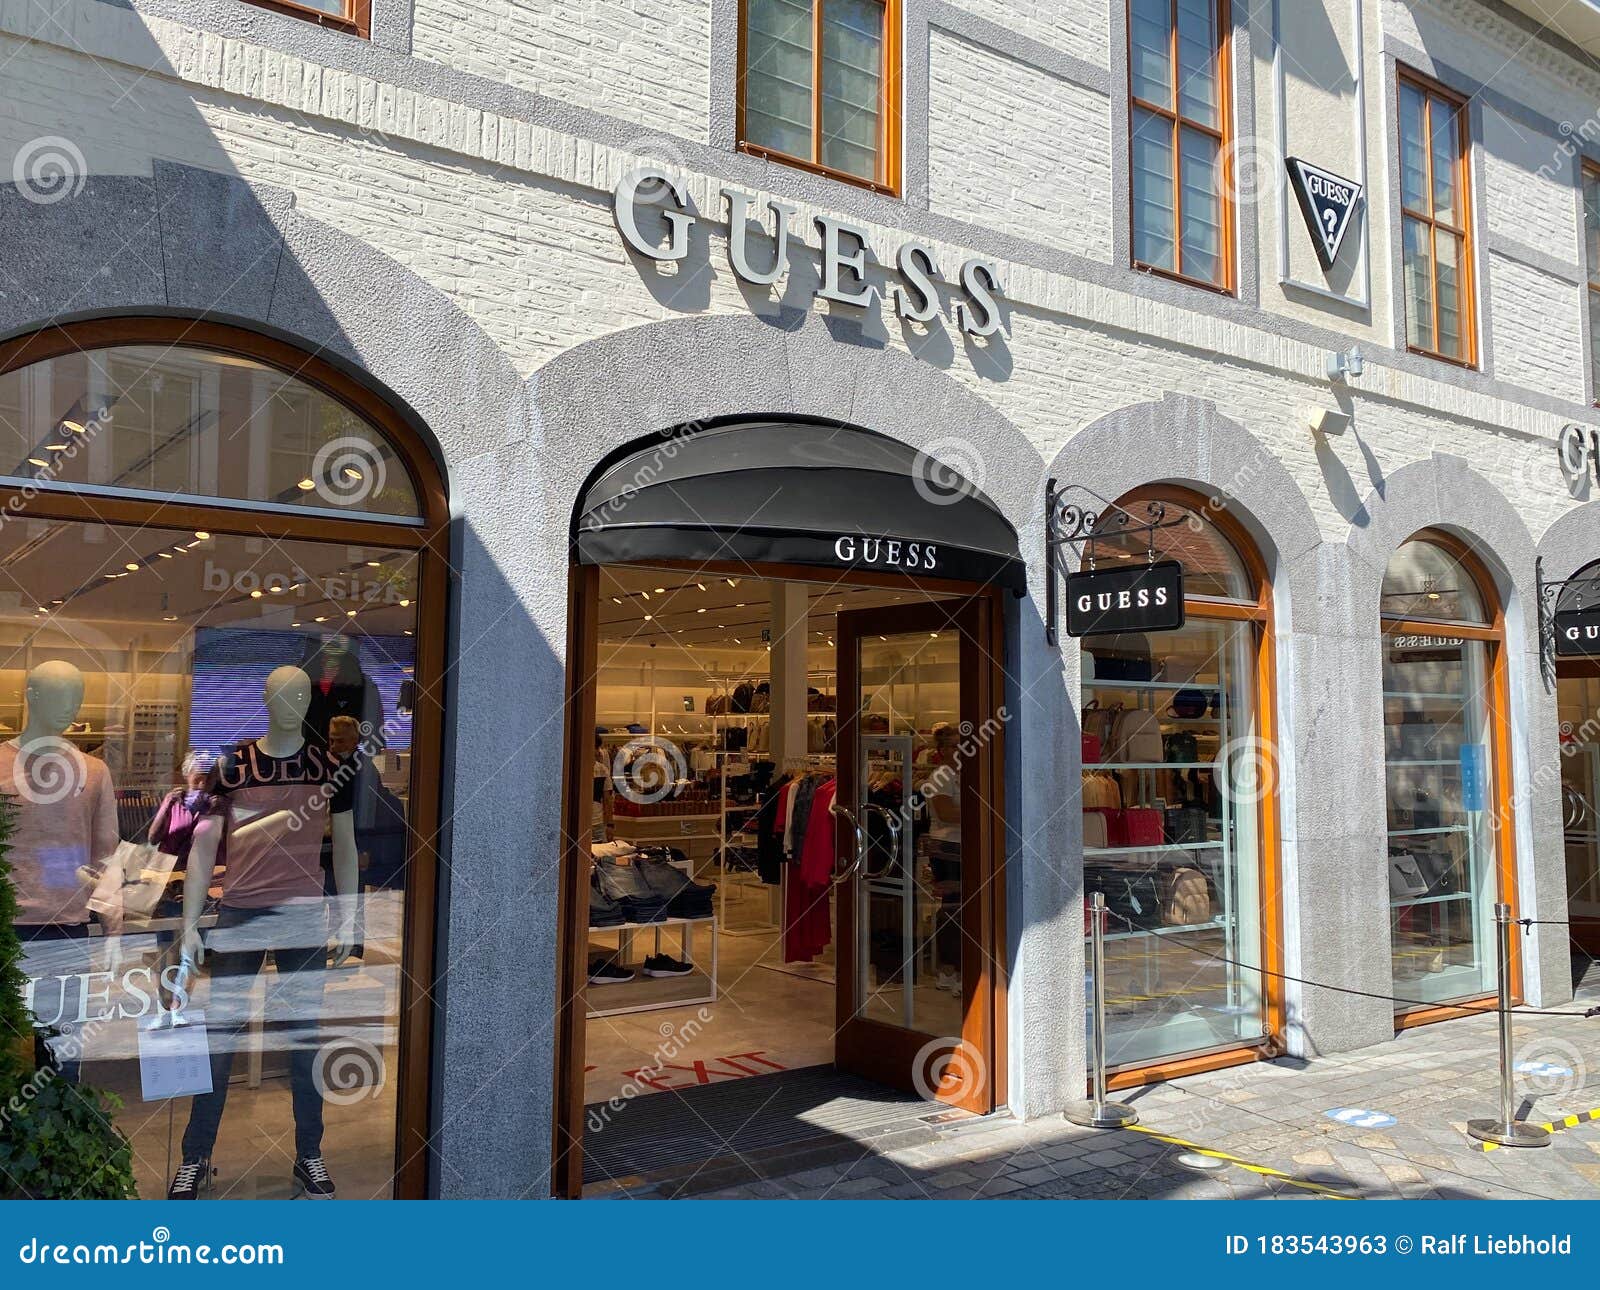 View on Facade Logo of Guess Fashion Company at Shop Editorial Photo - Image of company, sign: 183543963